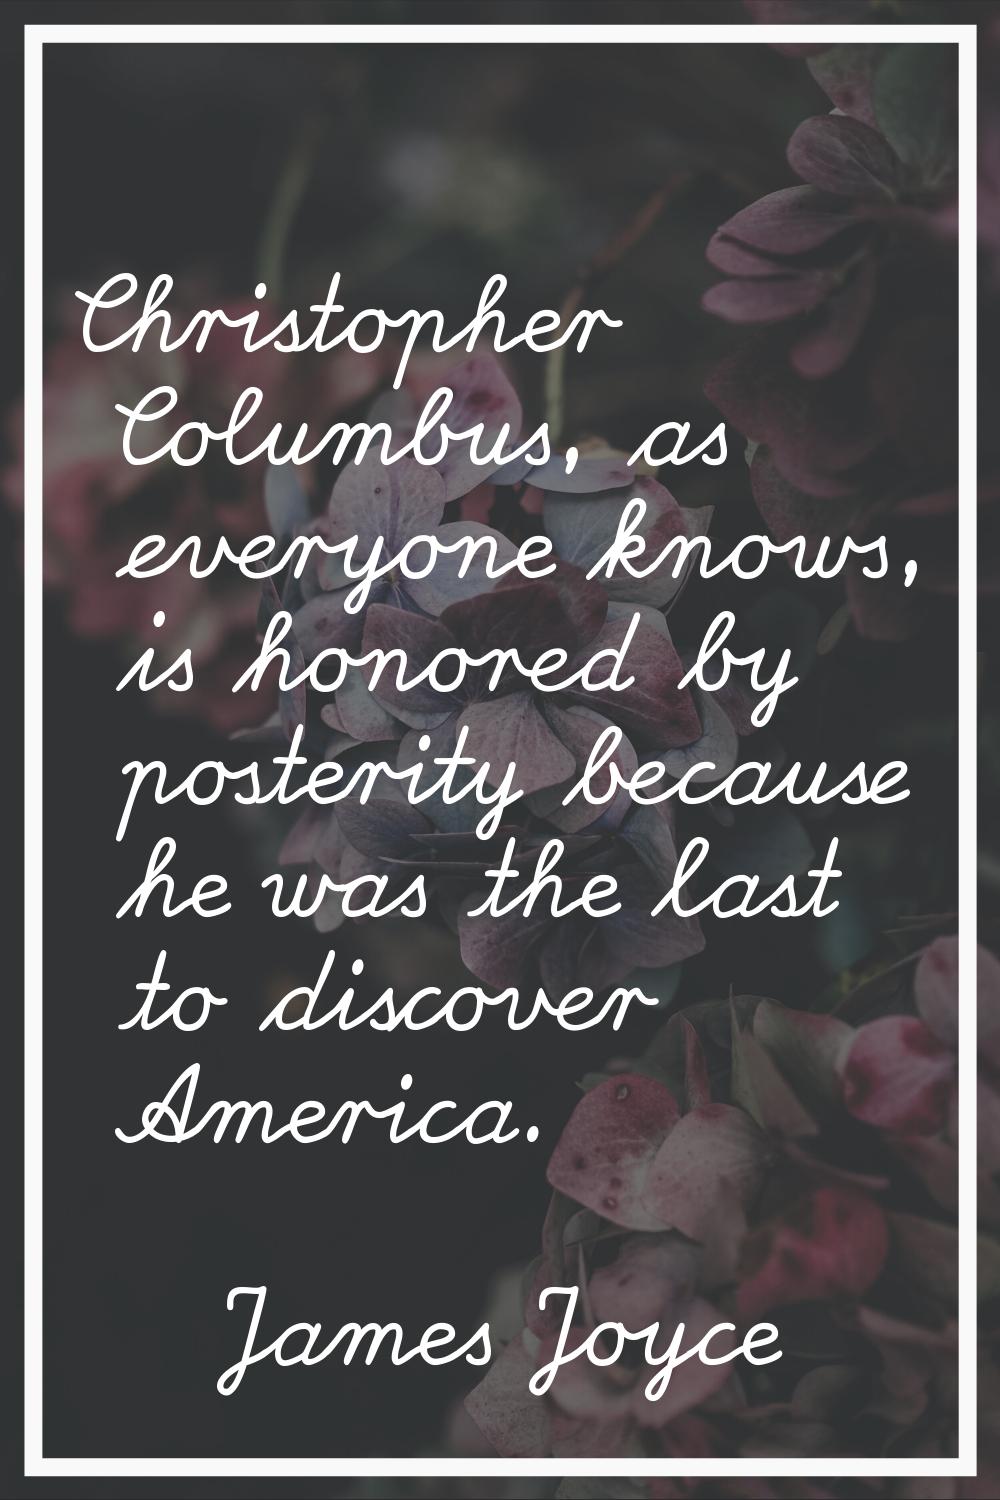 Christopher Columbus, as everyone knows, is honored by posterity because he was the last to discove